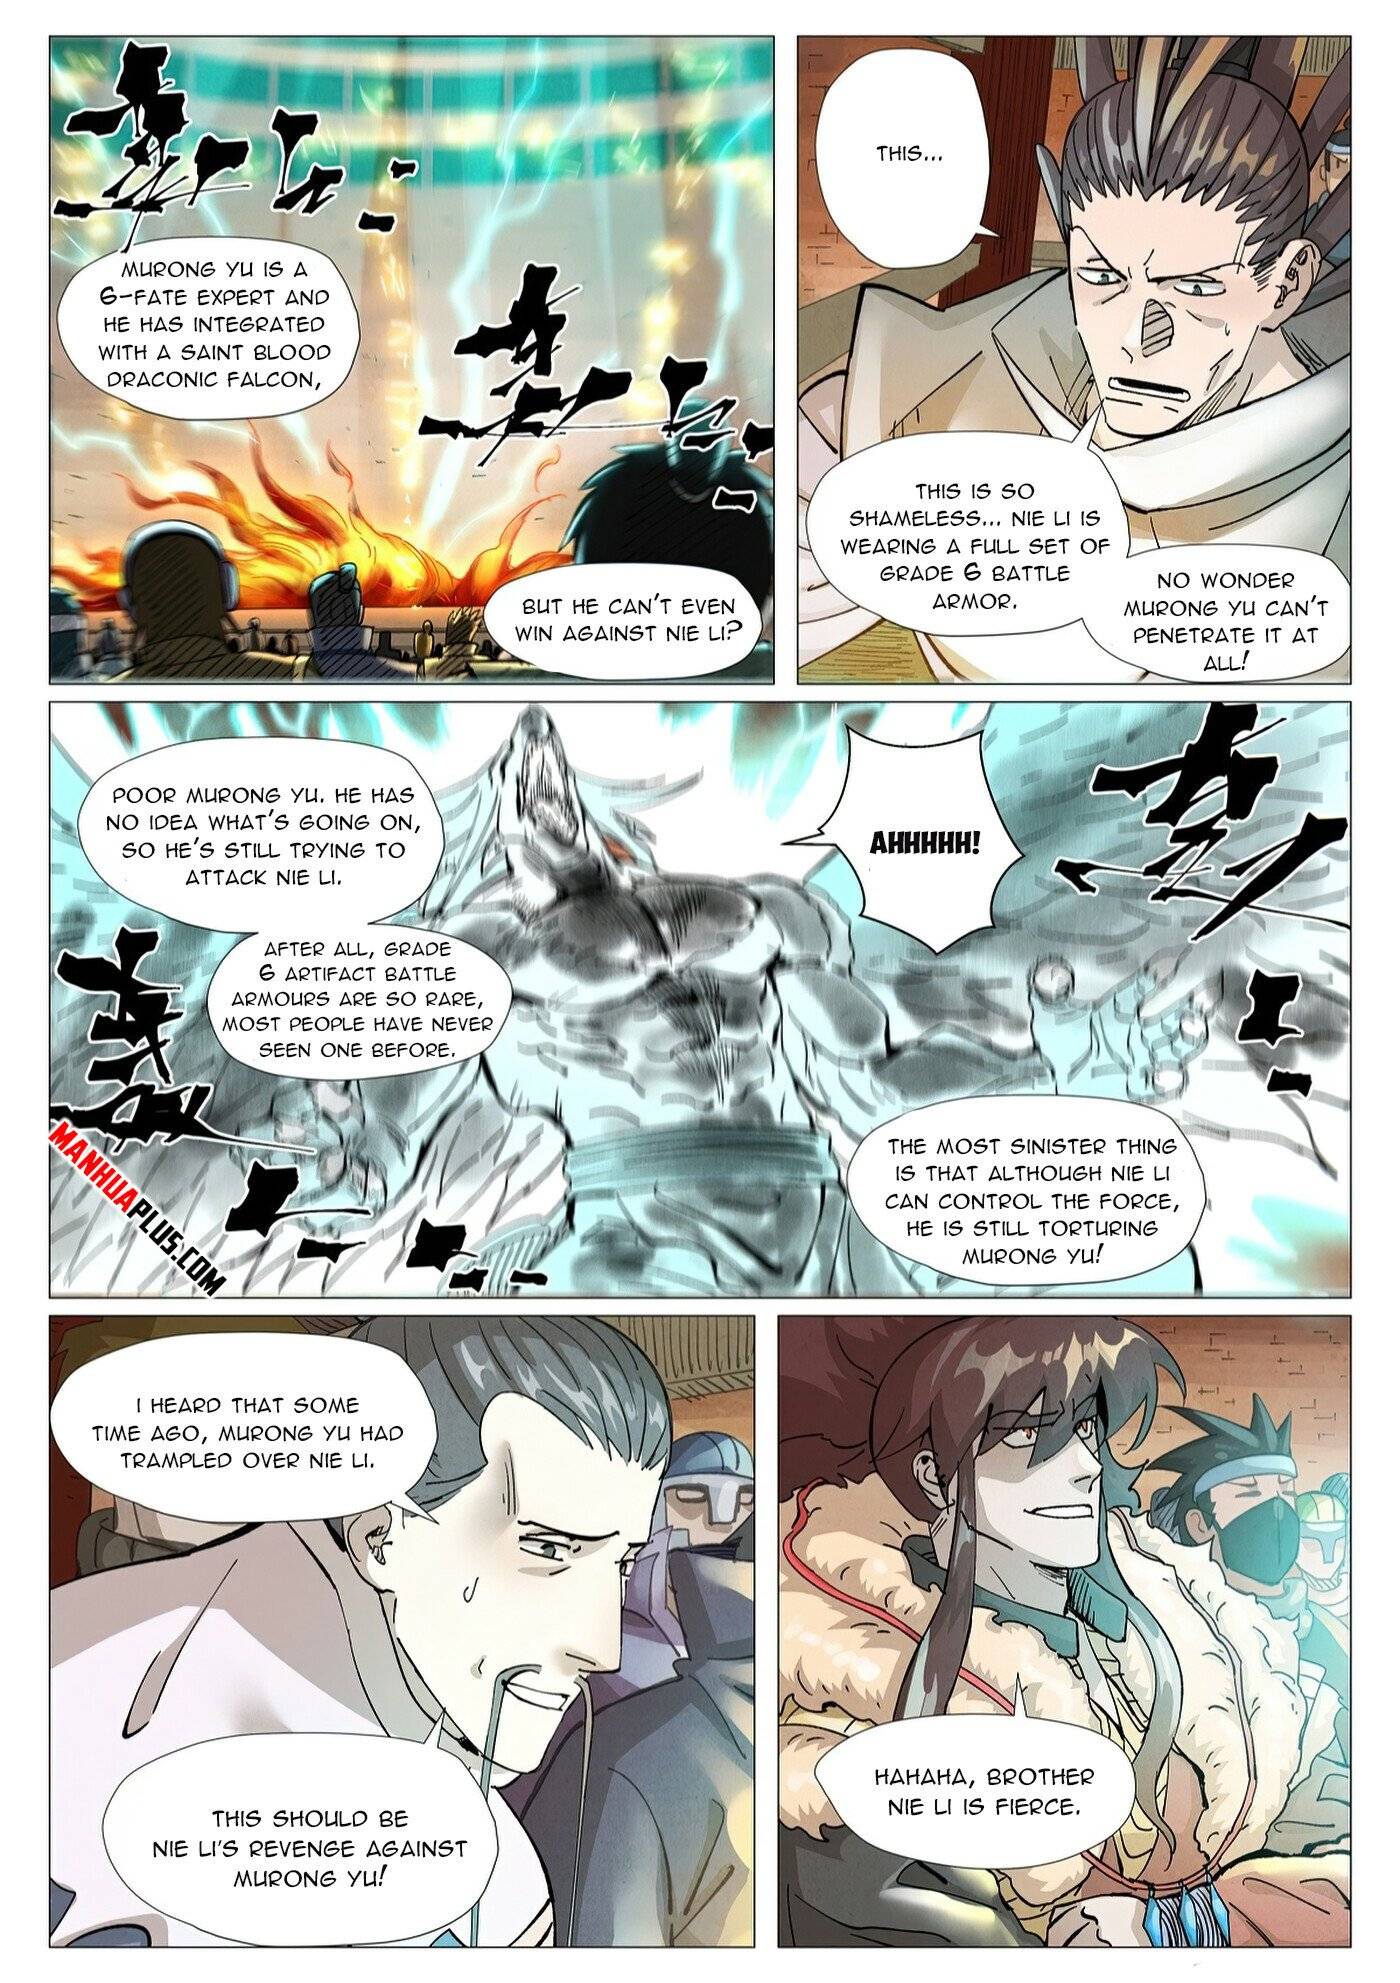 Tales of Demons and Gods Manhua Chapter 370.5 - Page 1